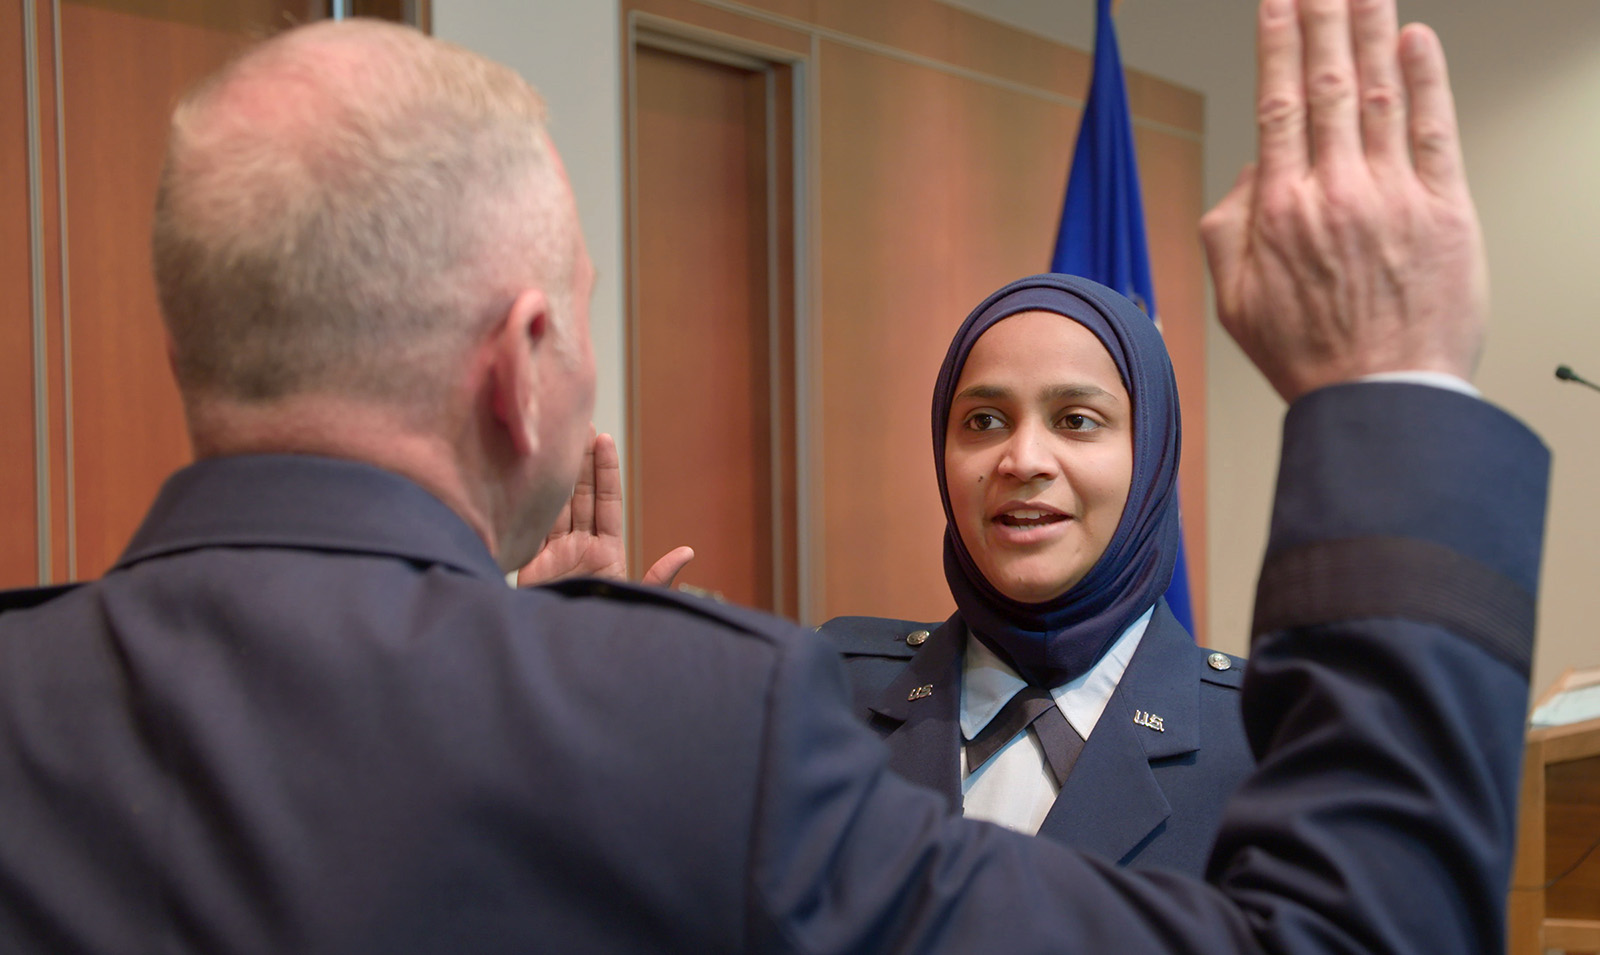 Saleha Jabeen takes the oath to enter the Air Force chaplain corps, at Catholic Theological Union in Chicago. (Photo by David Washburn)